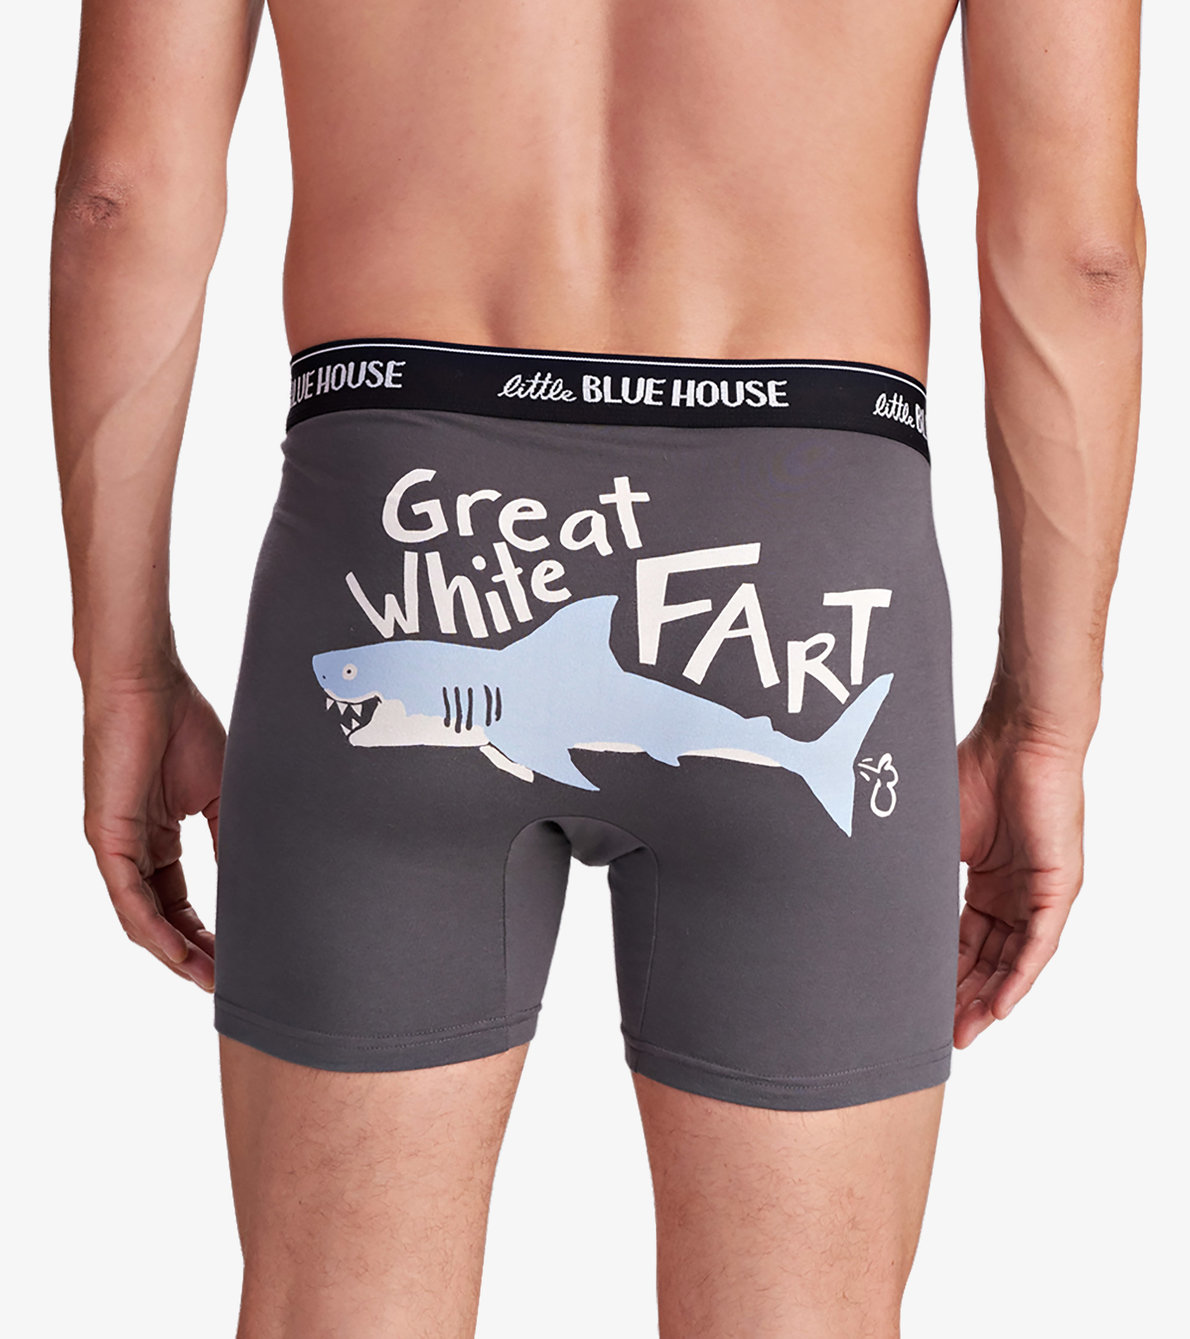 View larger image of Great White Fart Men's Boxer Briefs